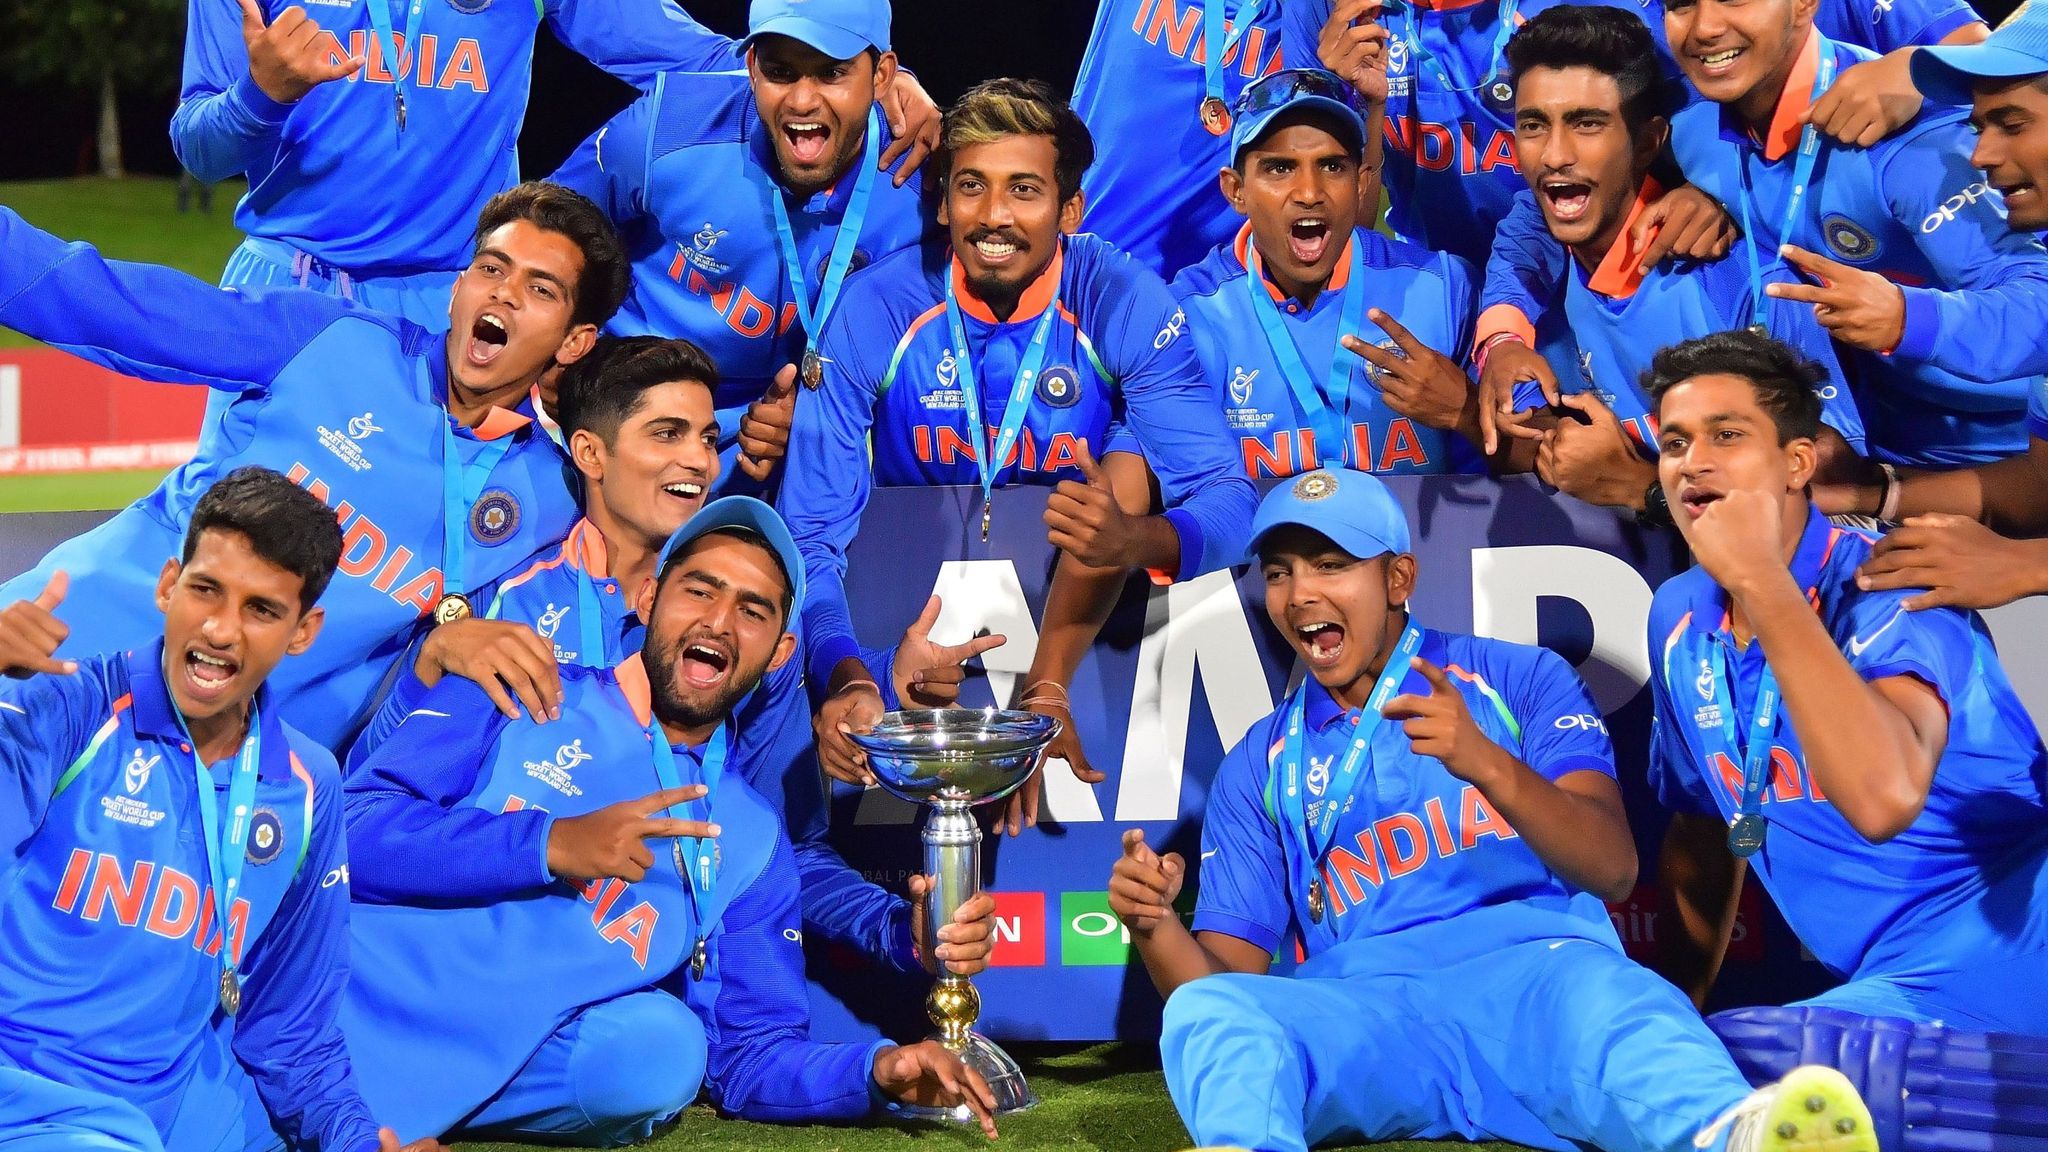 Watch The Icc Under 19 Cricket World Cup On Sky Sports Cricket News Sky Sports